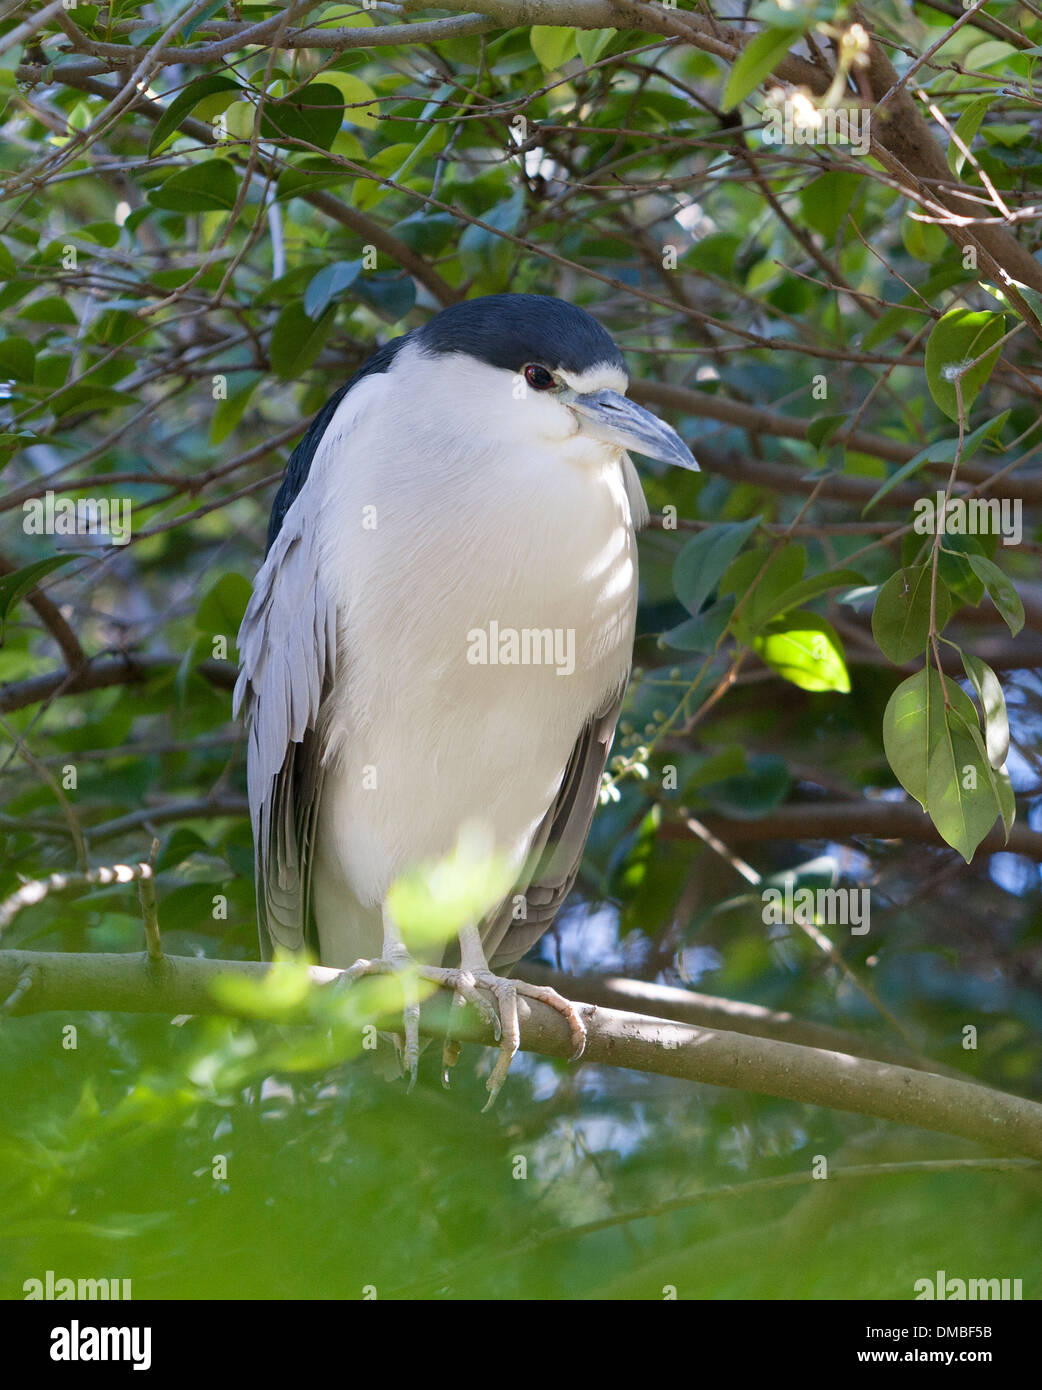 The Black-crowned Night Heron, or just Night Heron, is a medium-sized heron found throughout a large part of the world. Stock Photo